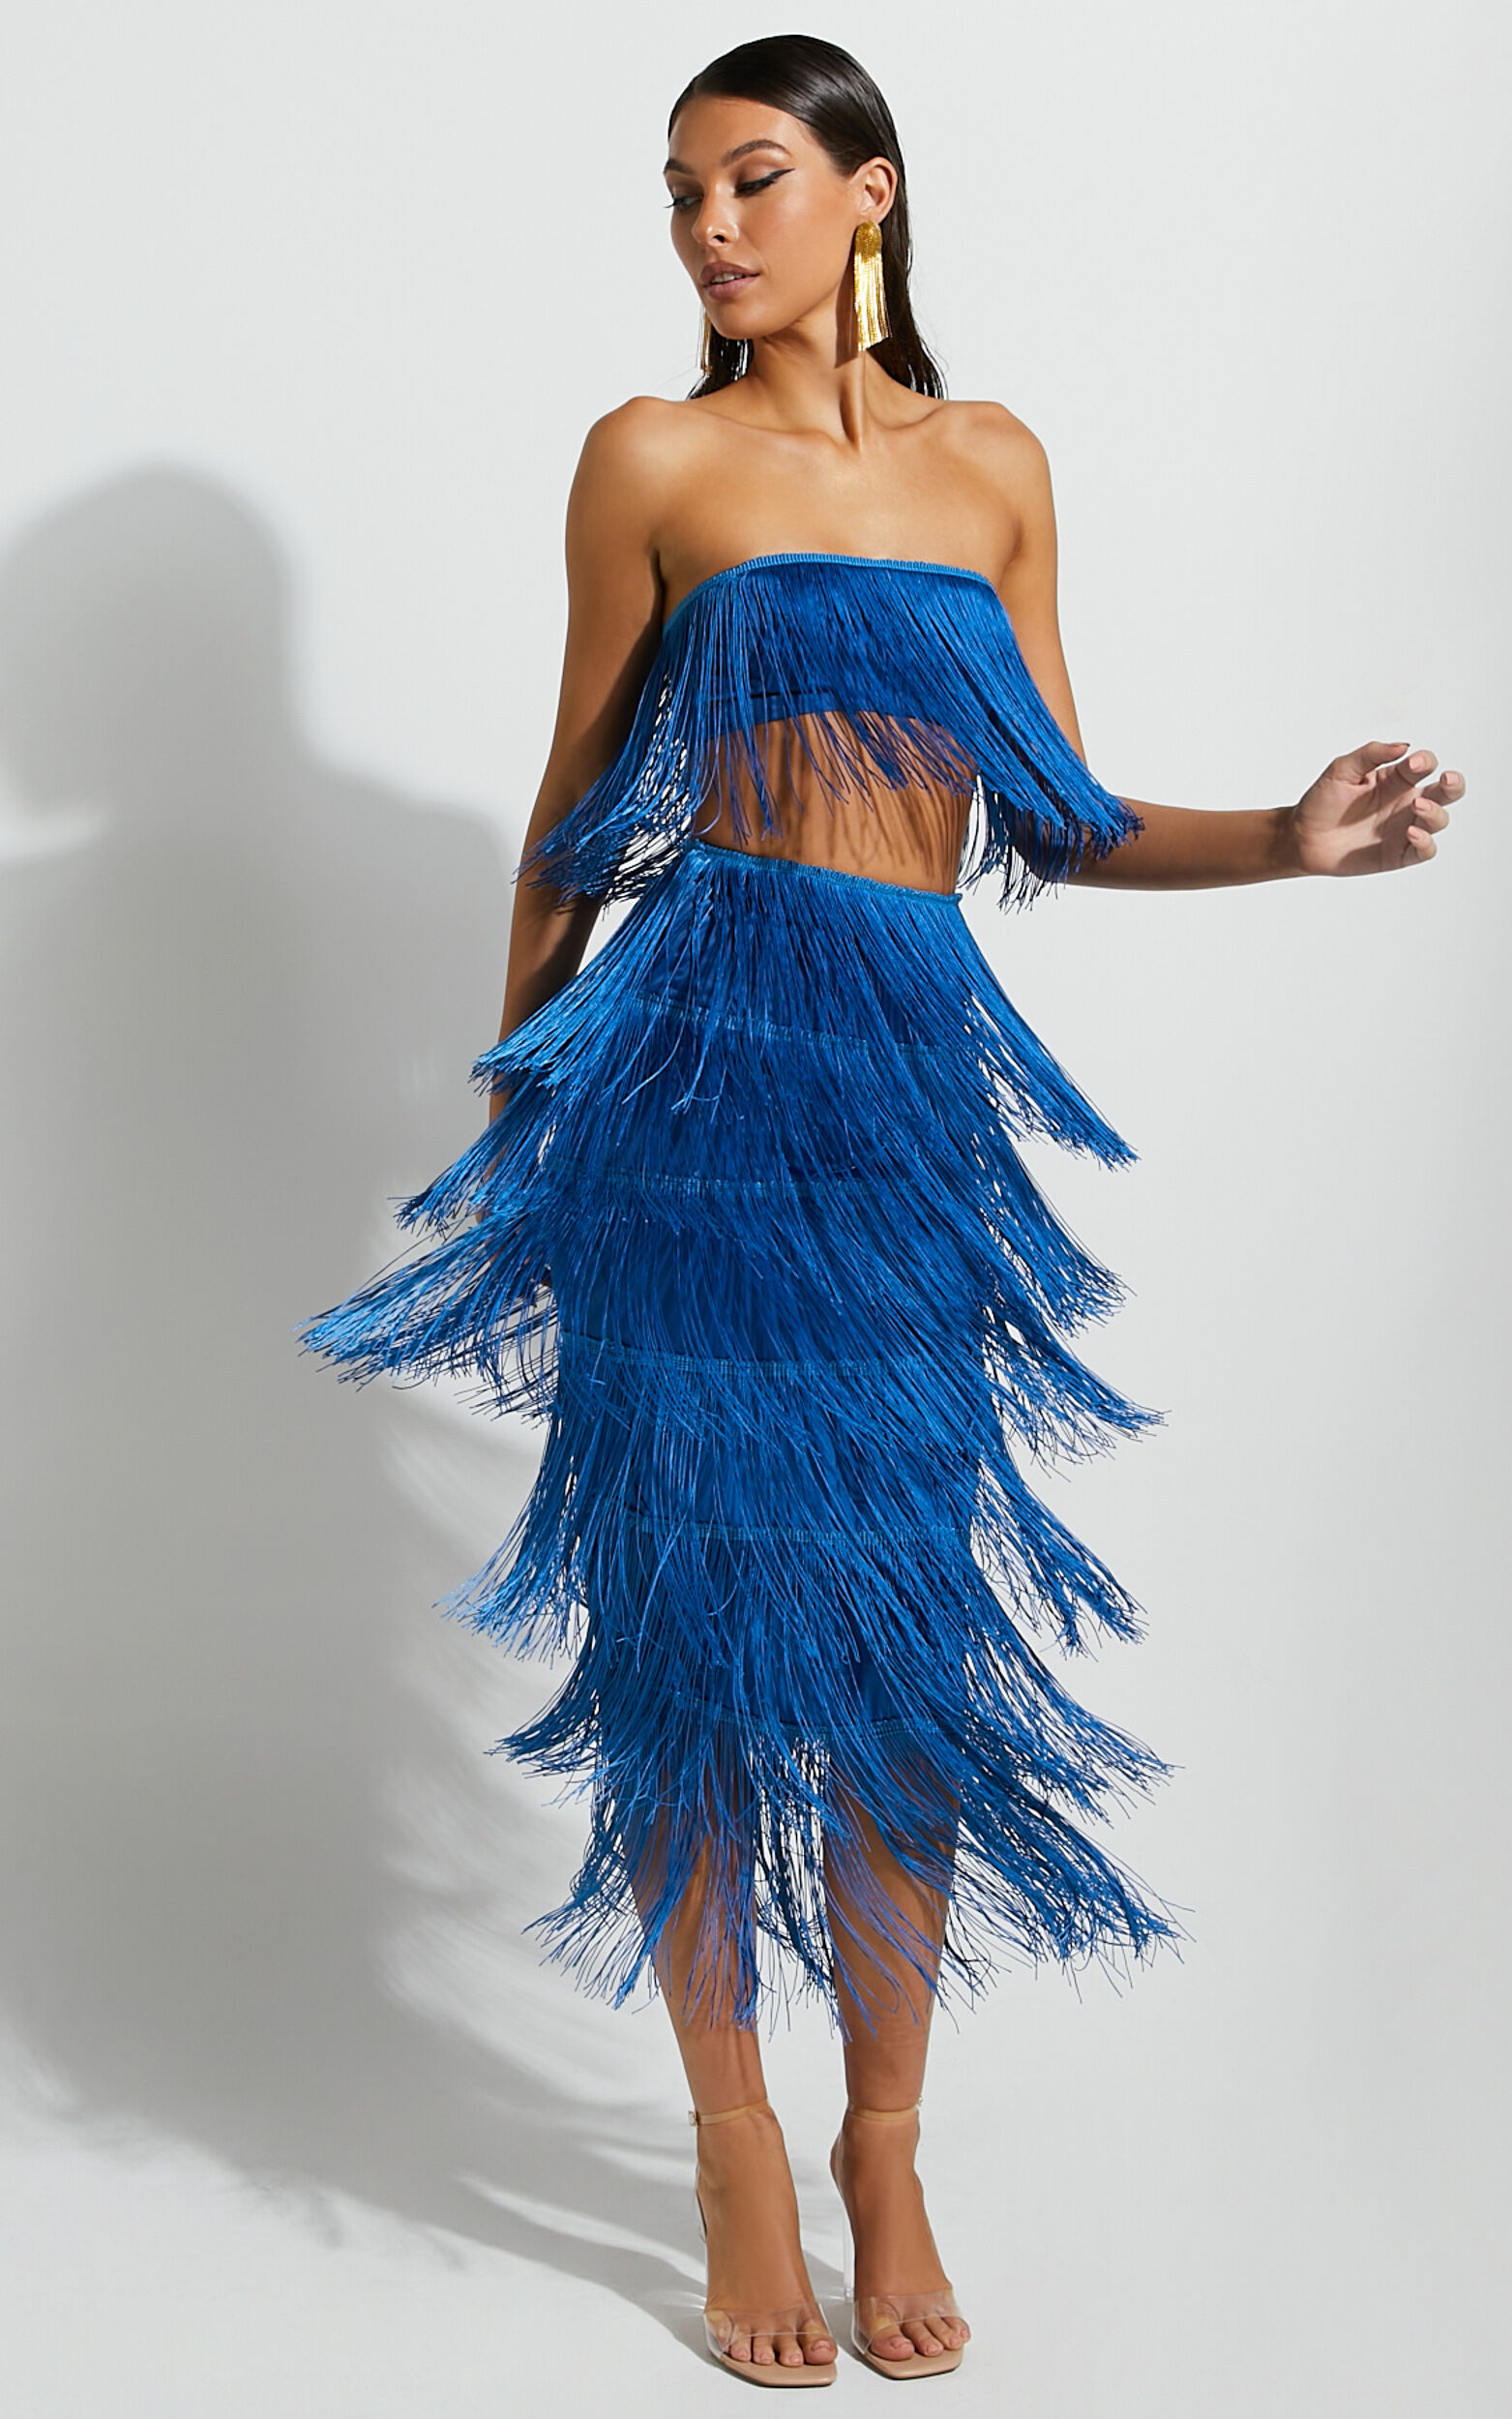 Amalee Two Piece Set - Fringe Strapless Crop Top and Midi Skirt